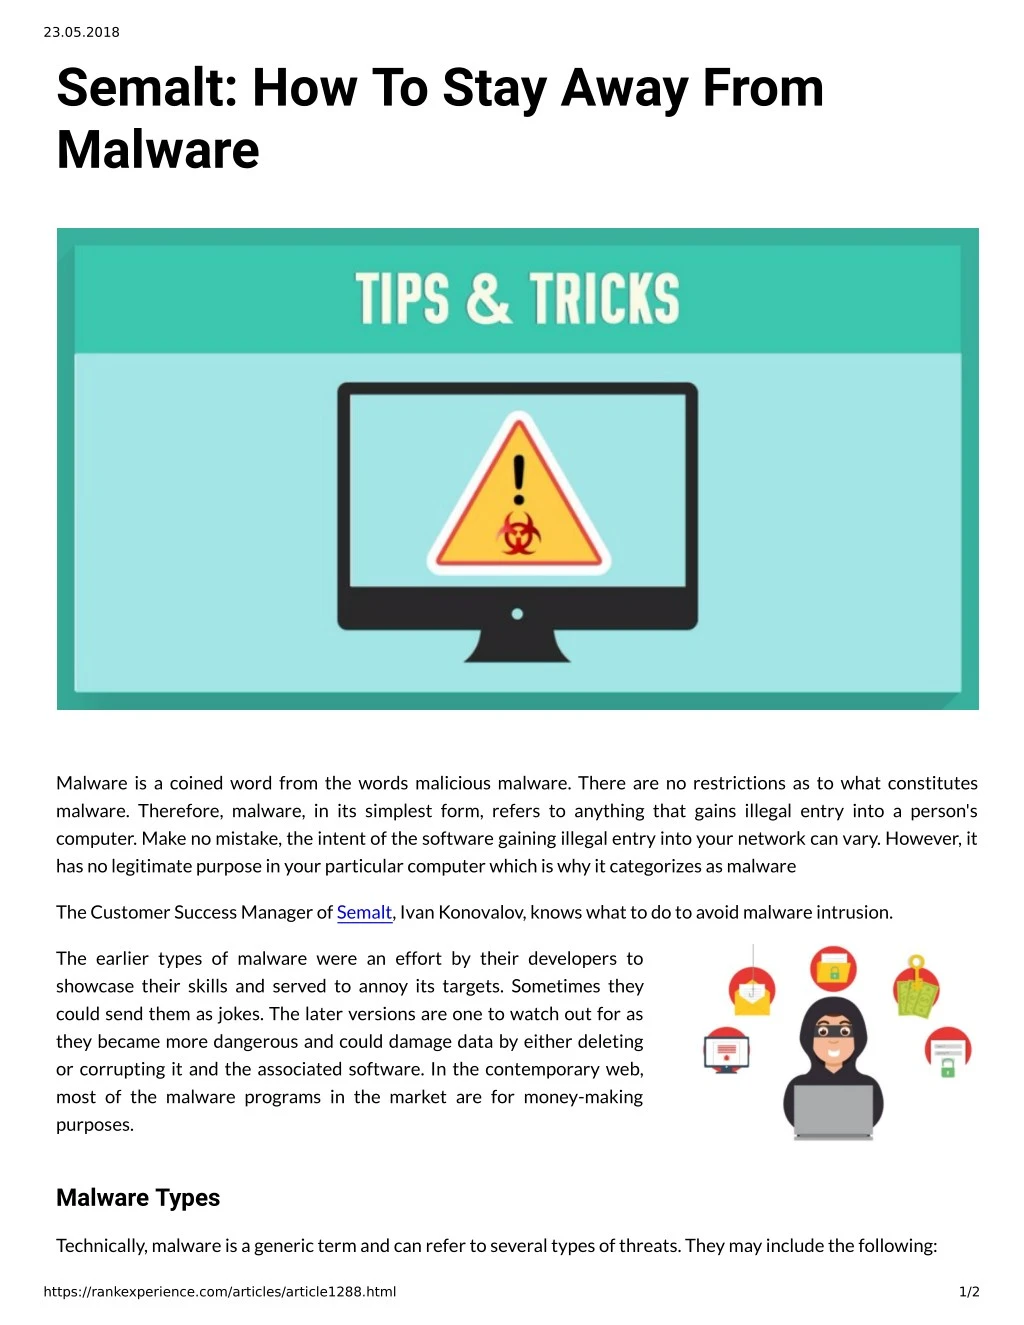 23 05 2018 semalt how to stay away from malware